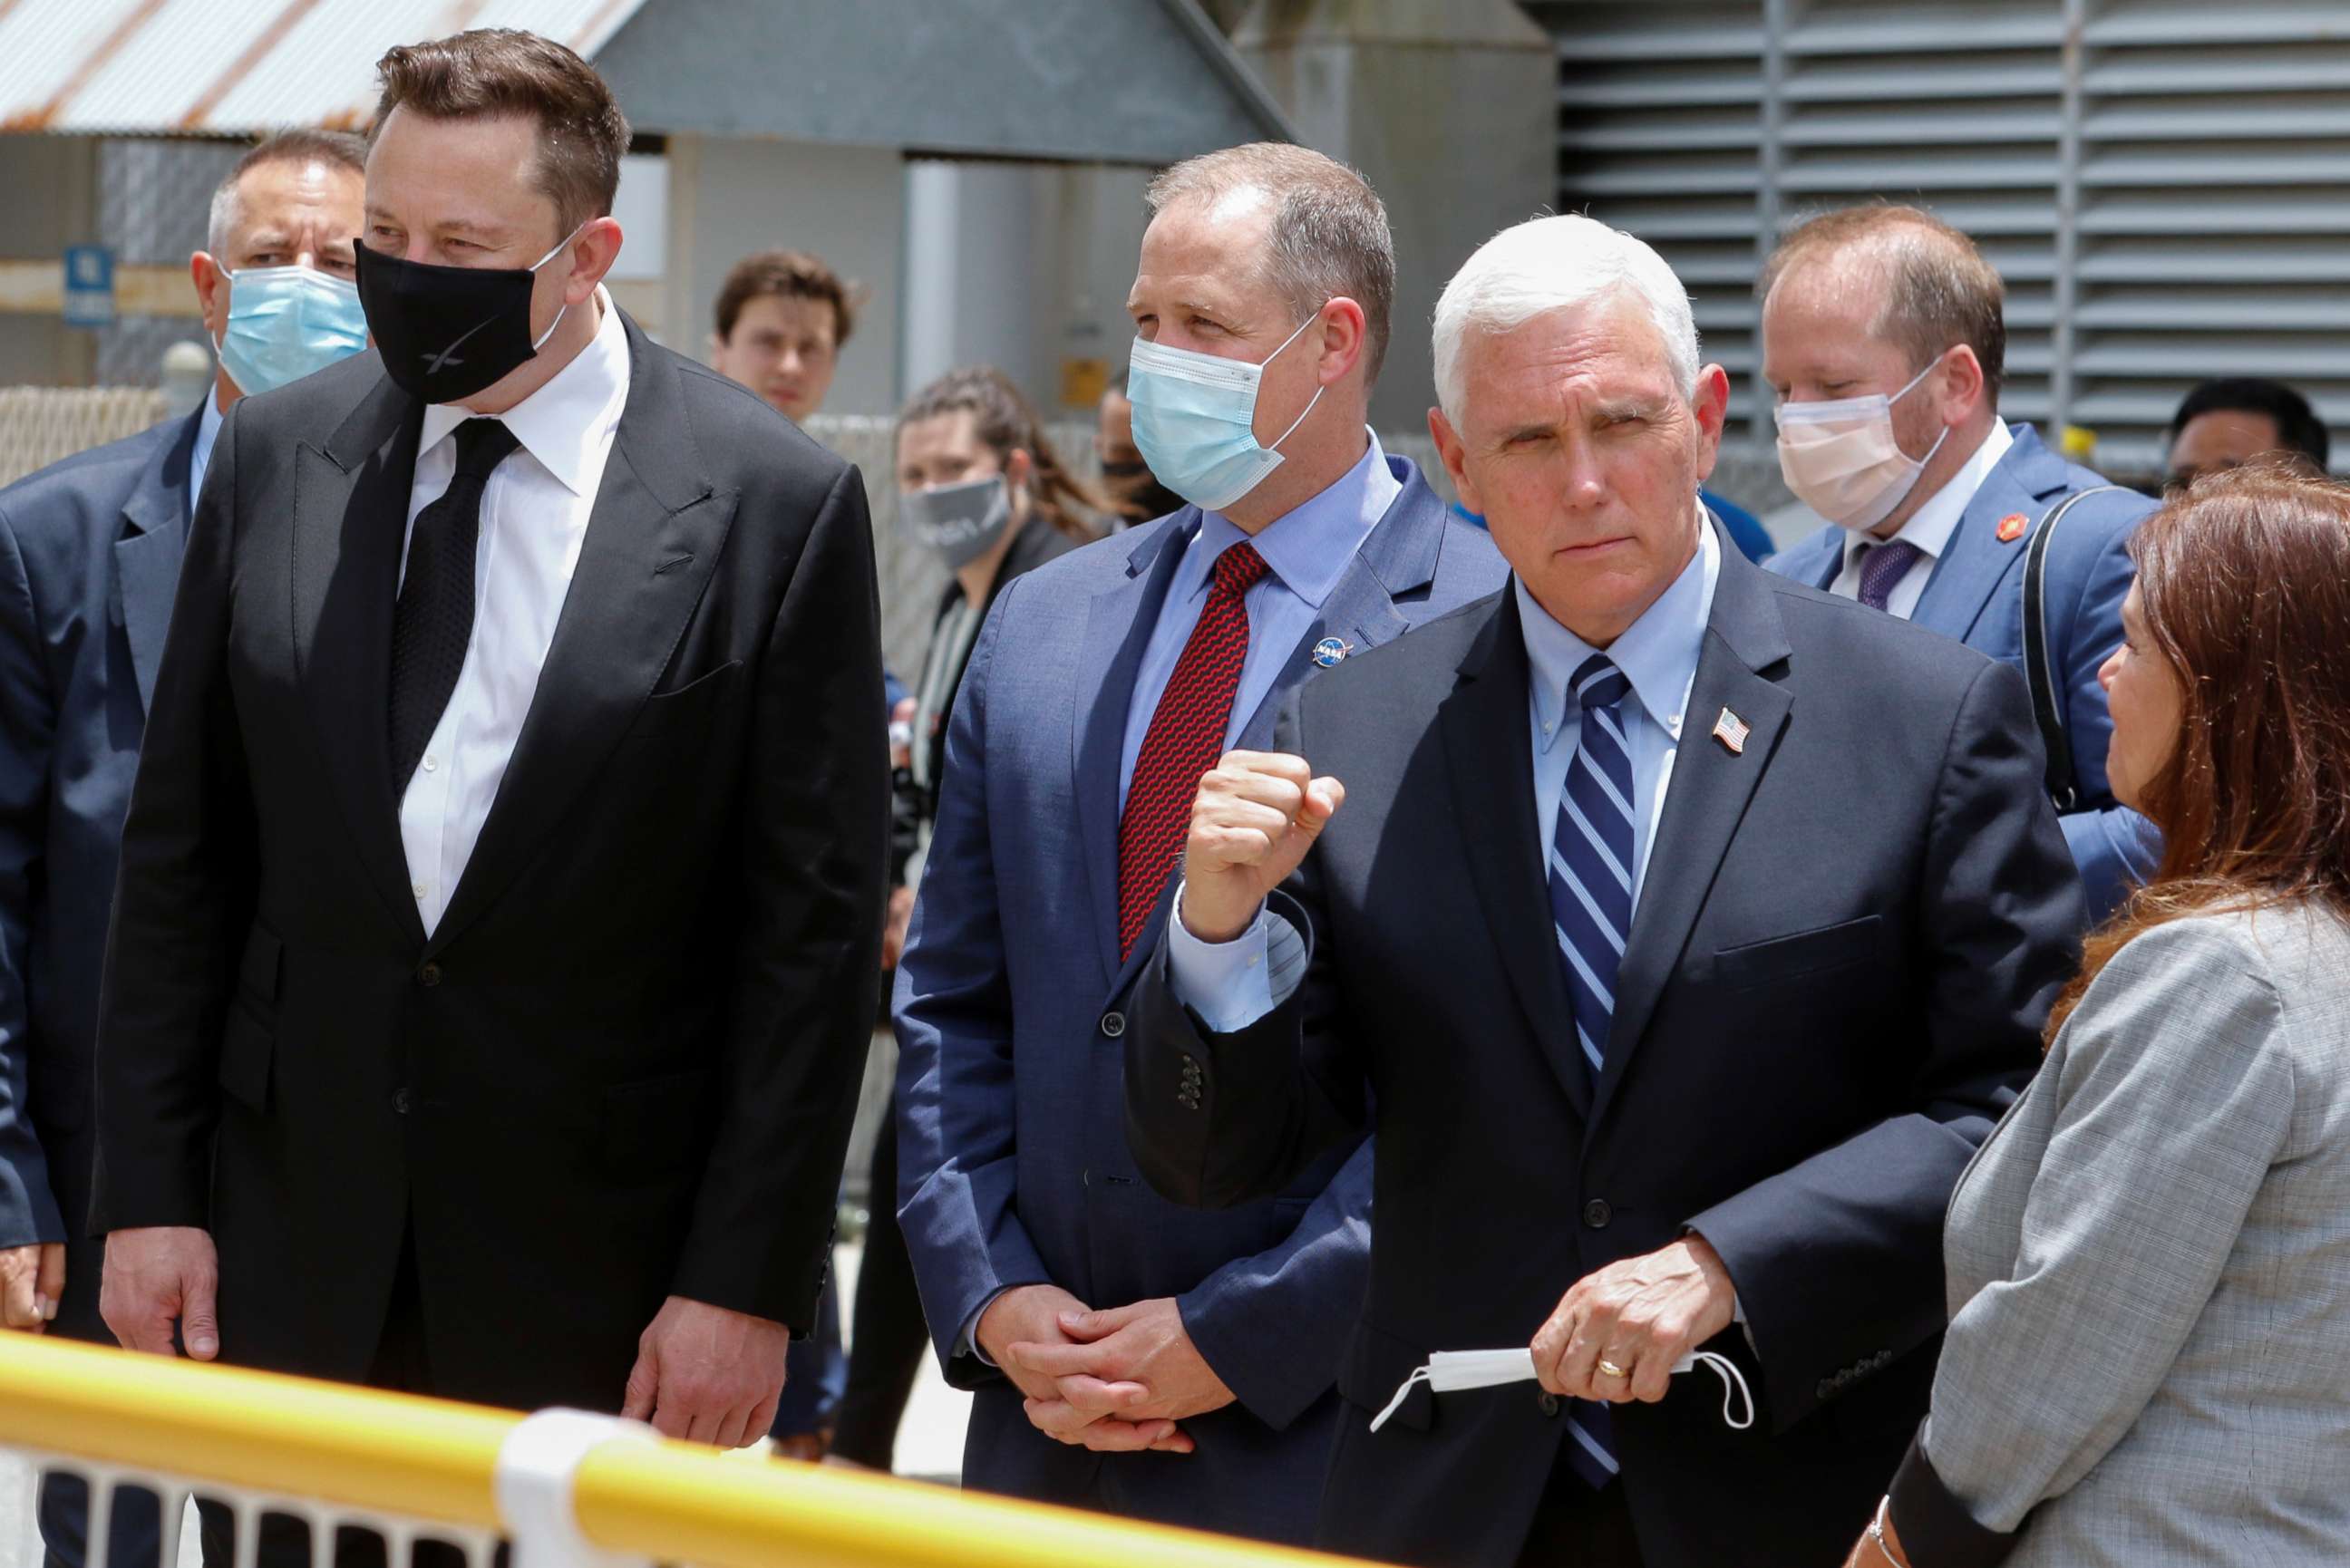 PHOTO: U.S. Vice President Mike Pence, SpaceX founder Elon Musk and NASA Administrator Jim Bridenstine are seen before the launch of a SpaceX Falcon 9 rocket and Crew Dragon spacecraft at the Kennedy Space Center, in Cape Canaveral, Fla., May 27, 2020.